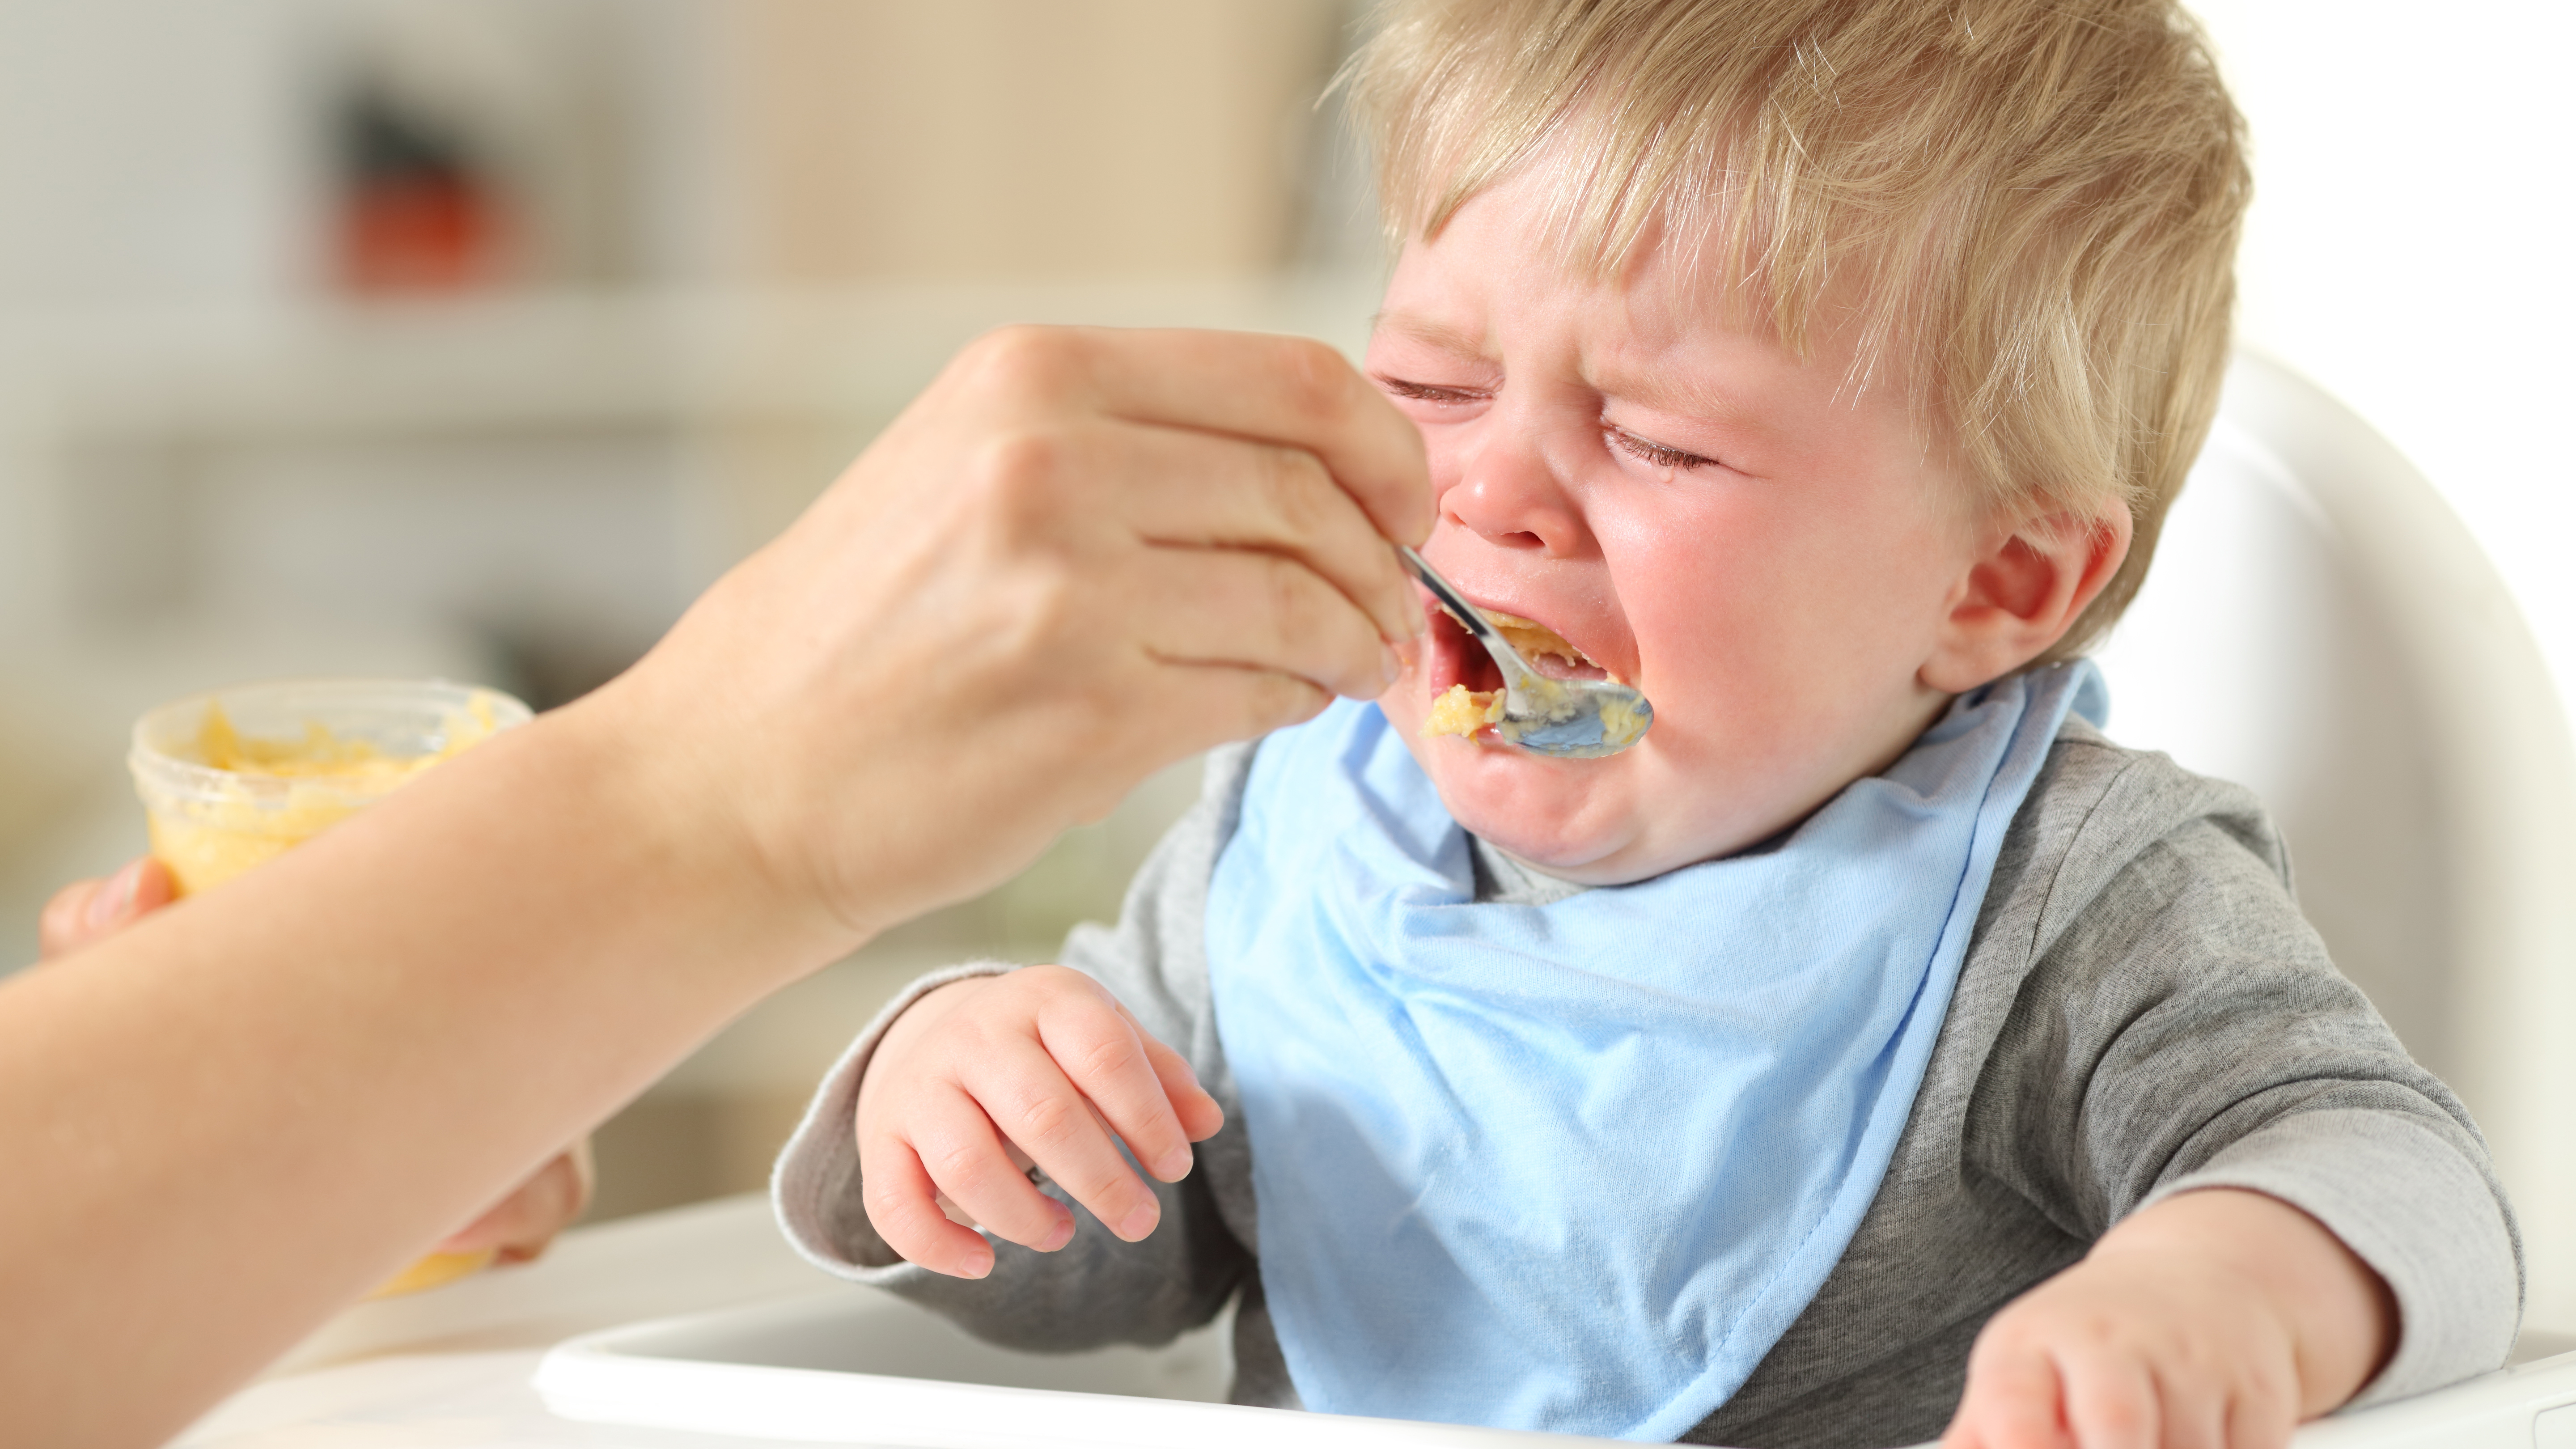 https://intermountainhealthcare.org/-/media/images/intermountain-health/blogs/blog/posts/2018/07/when-your-babys-not-eating-well.ashx?h=3240&iar=0&w=5760&hash=A43DC45474588C44C2AC67A5E1BB57C9